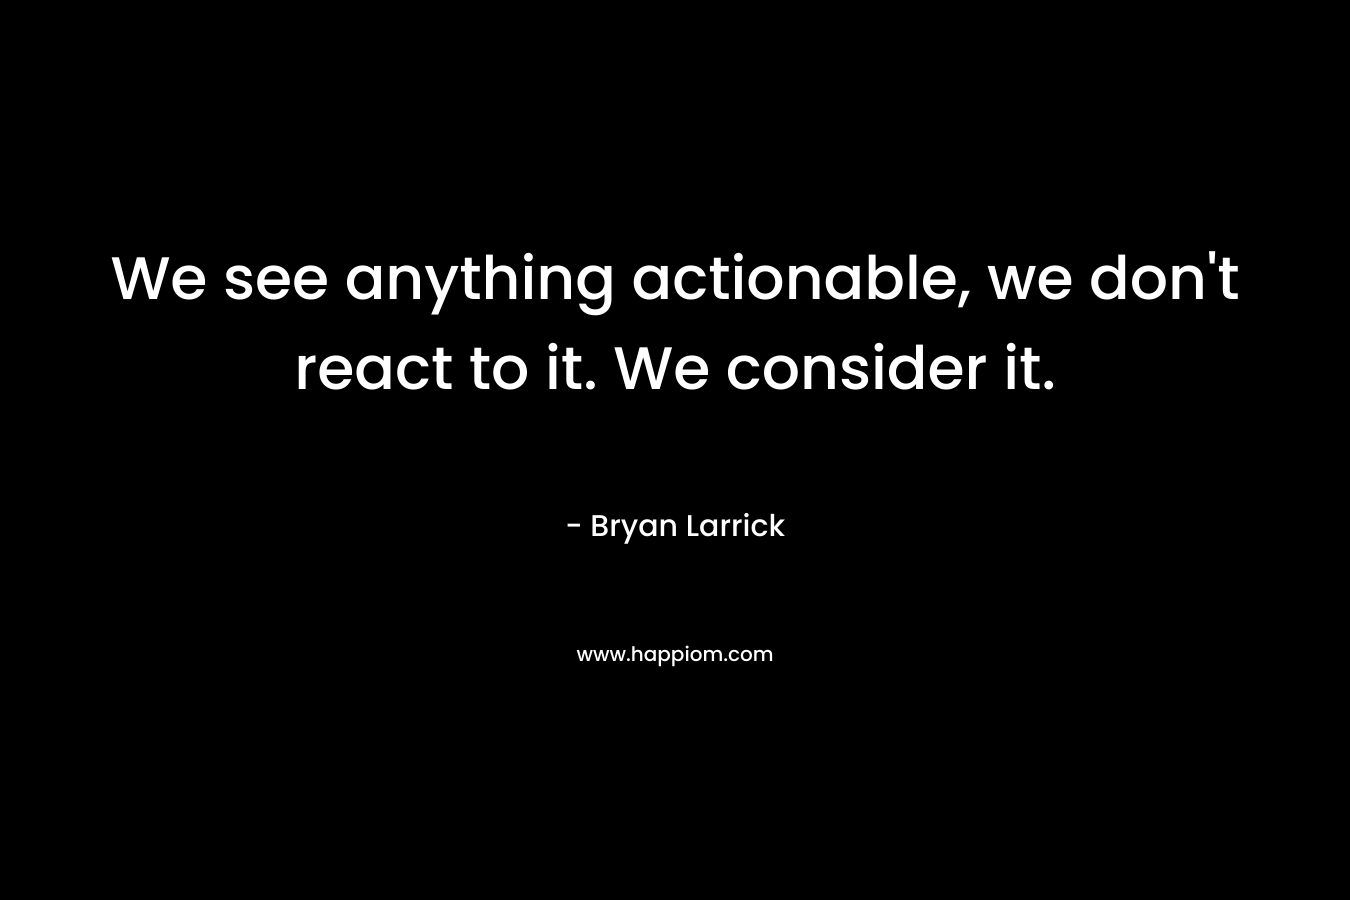 We see anything actionable, we don’t react to it. We consider it. – Bryan Larrick